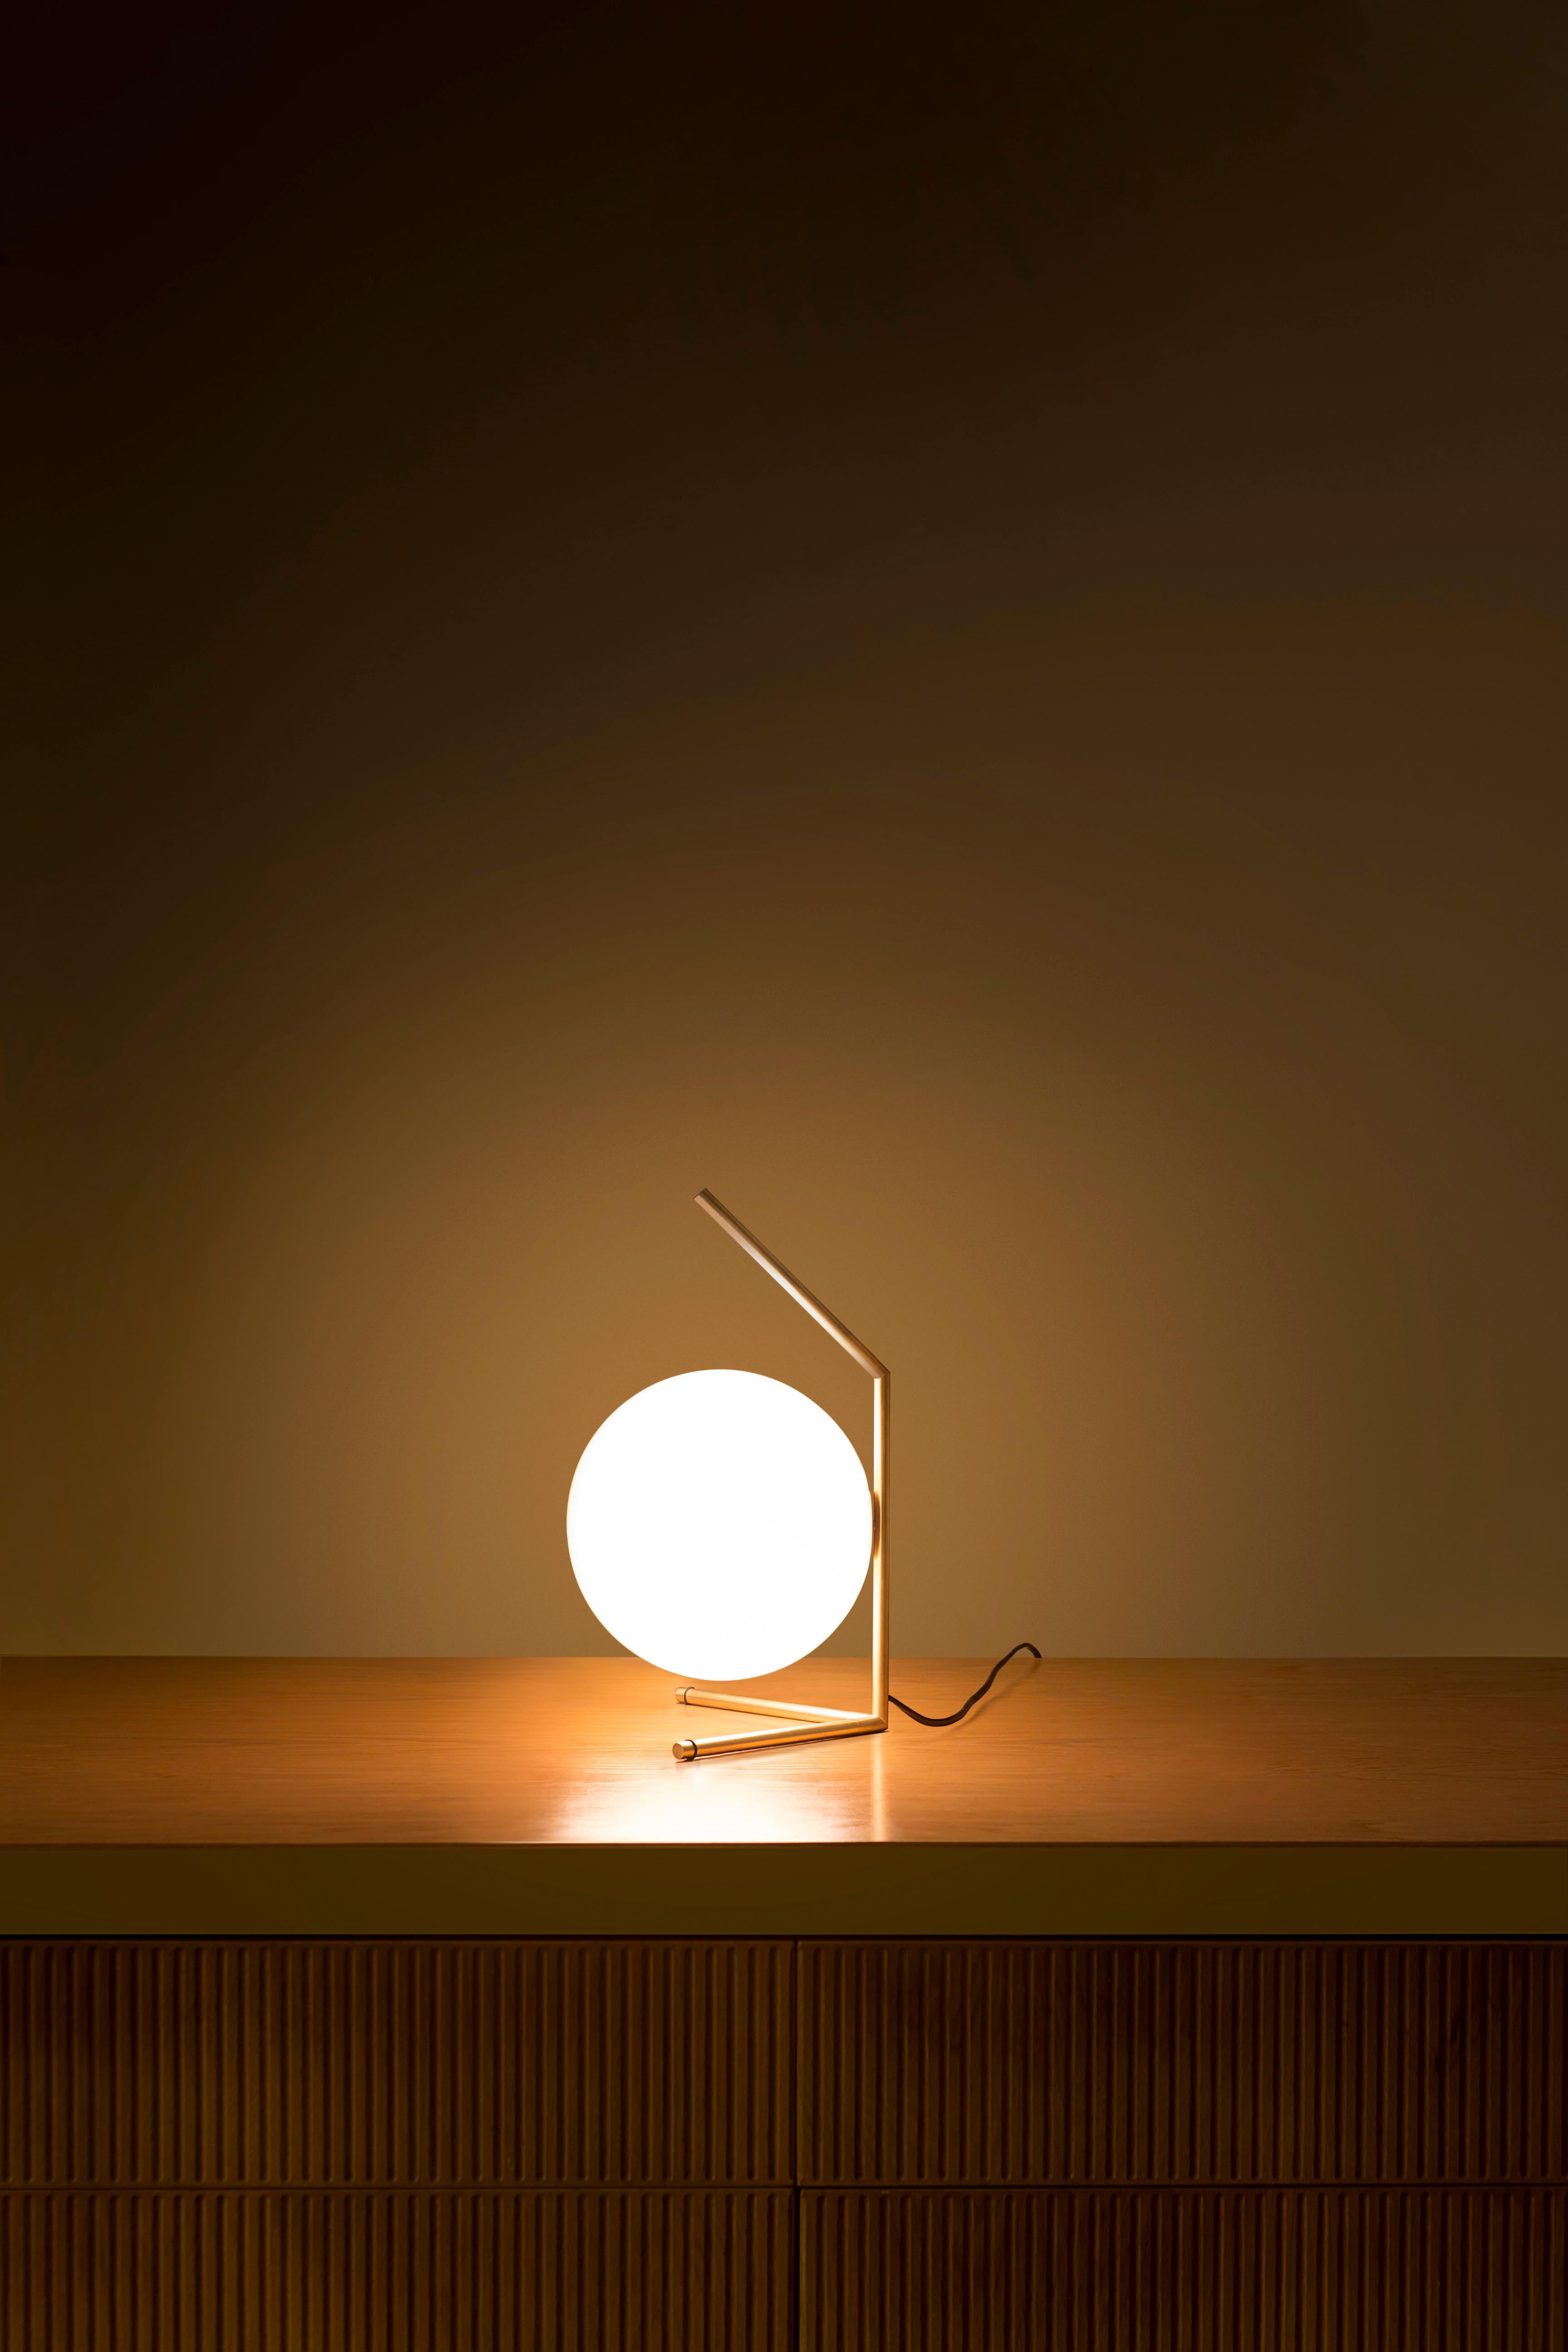 FLOS IC Lights T1 Low Table Lamp in Chrome by Michael Anastassiades

Like the other pieces in his IC Light Series, the IC Lights T balances designer Michael Anastassiades’ love of industrial simplicity with intricate symbolism. It provides diffused